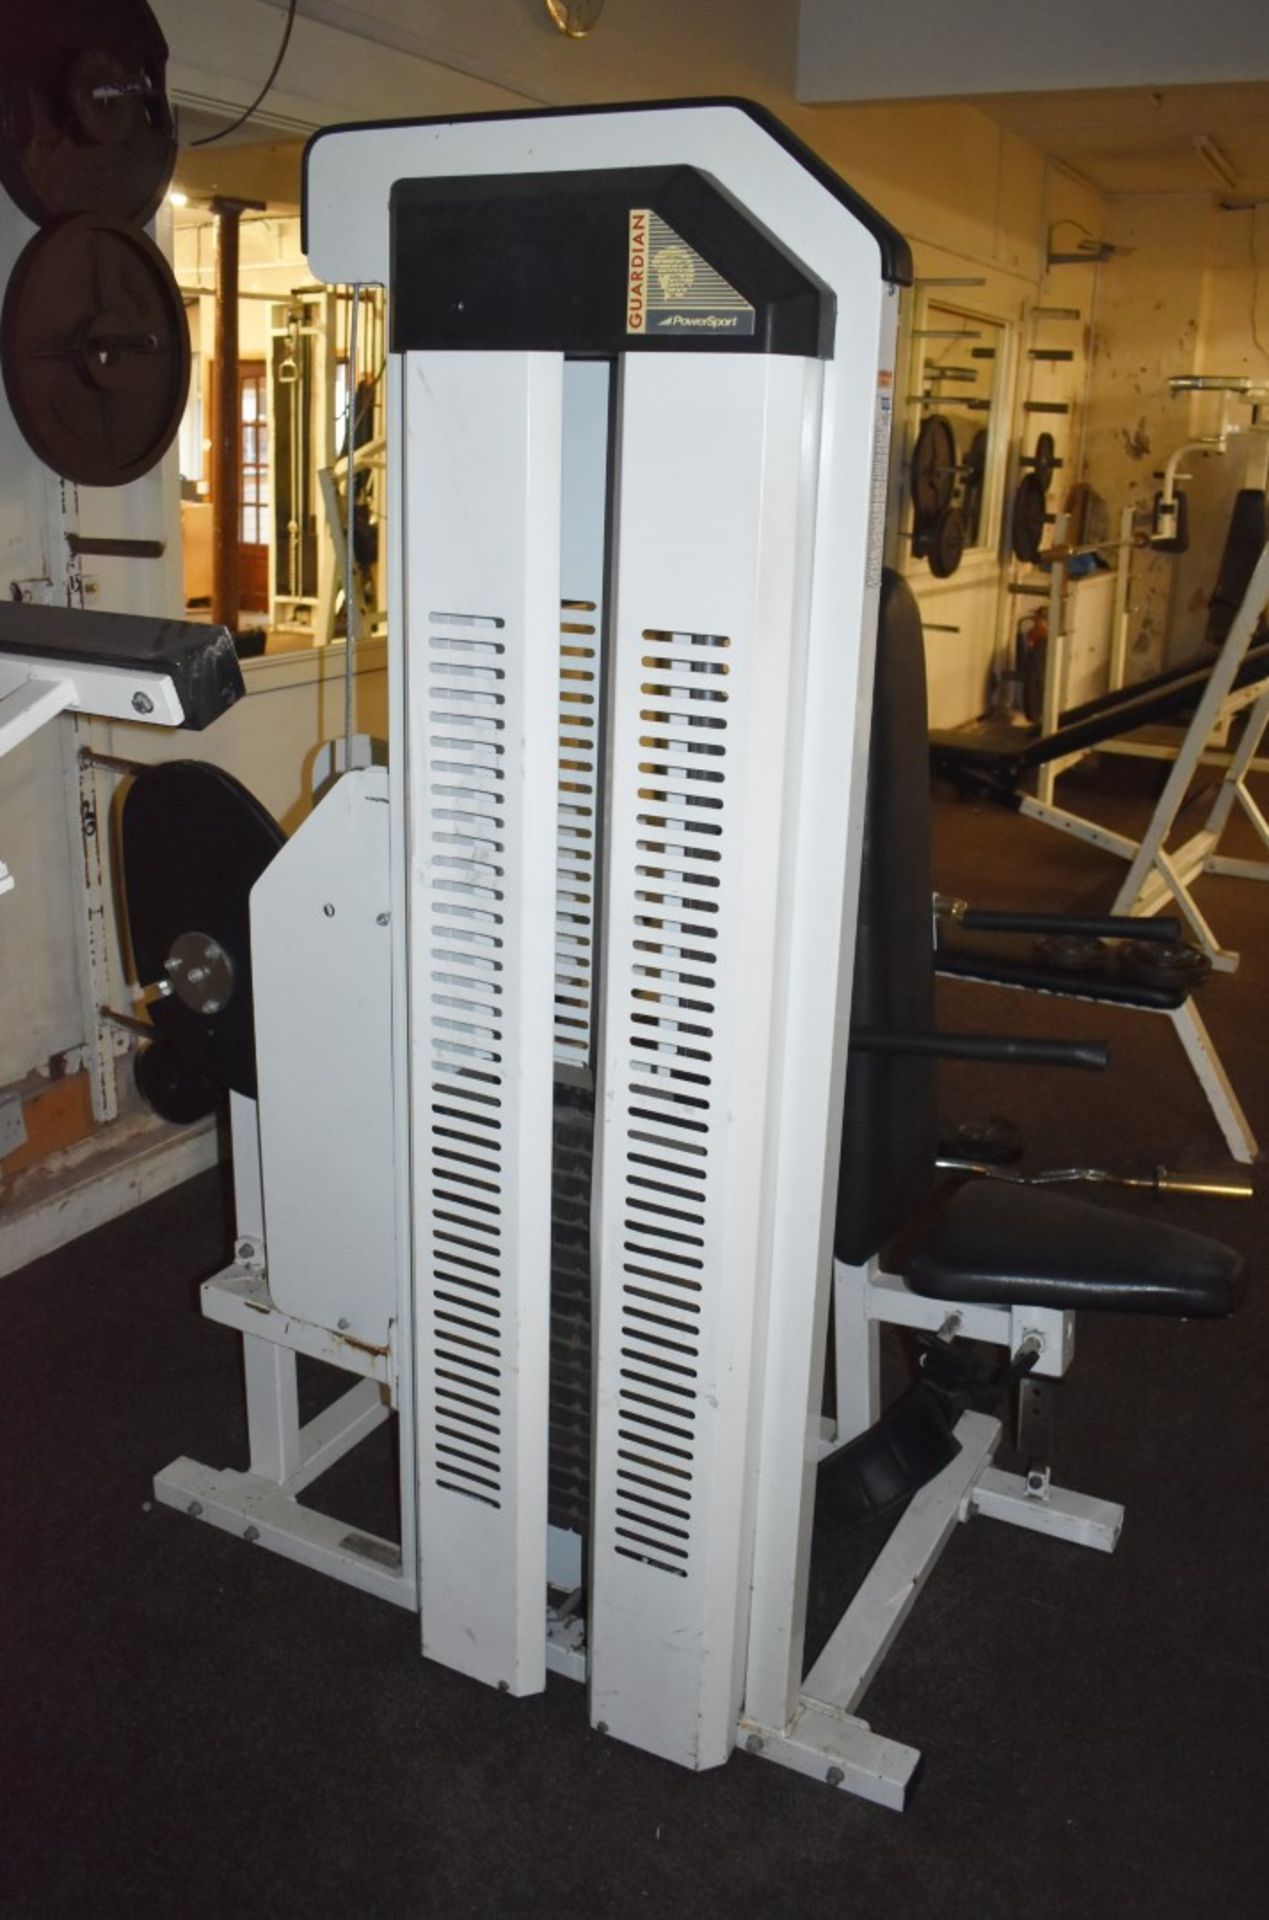 Contents of Bodybuilding and Strongman Gym - Includes Approx 30 Pieces of Gym Equipment, Floor Mats, - Image 19 of 95